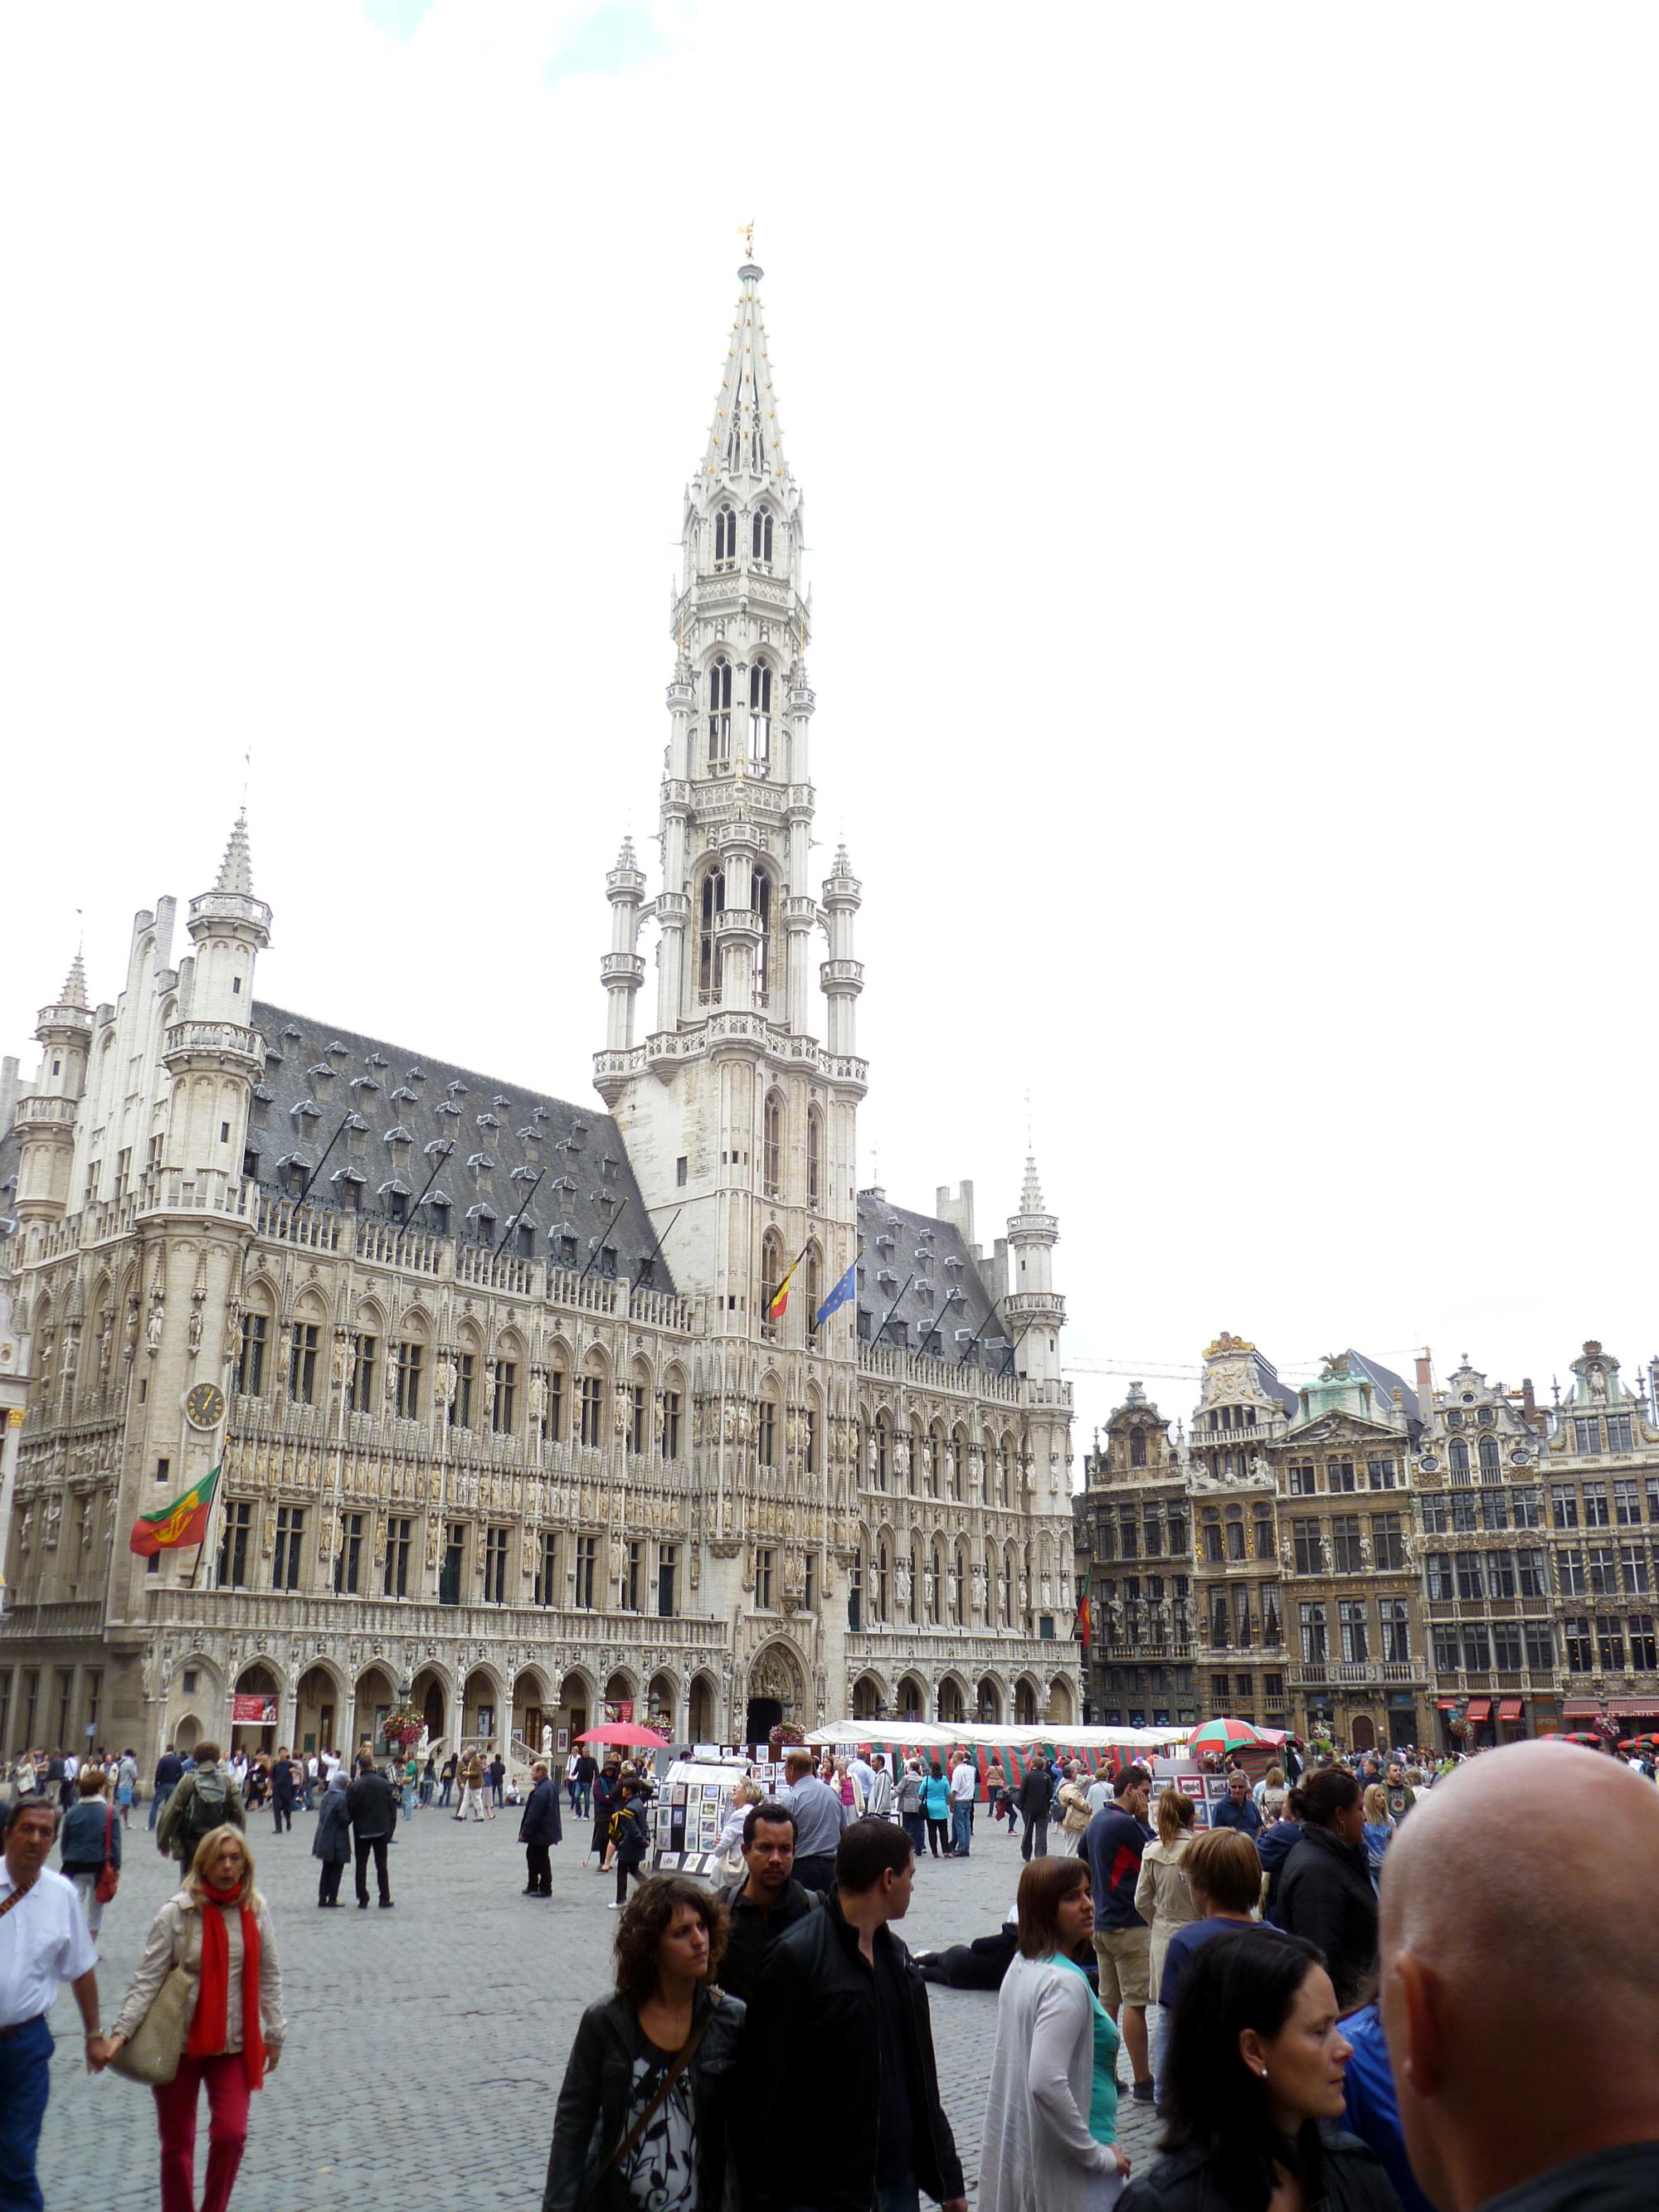 Brussels (2010-2016) - Brussels City Hall